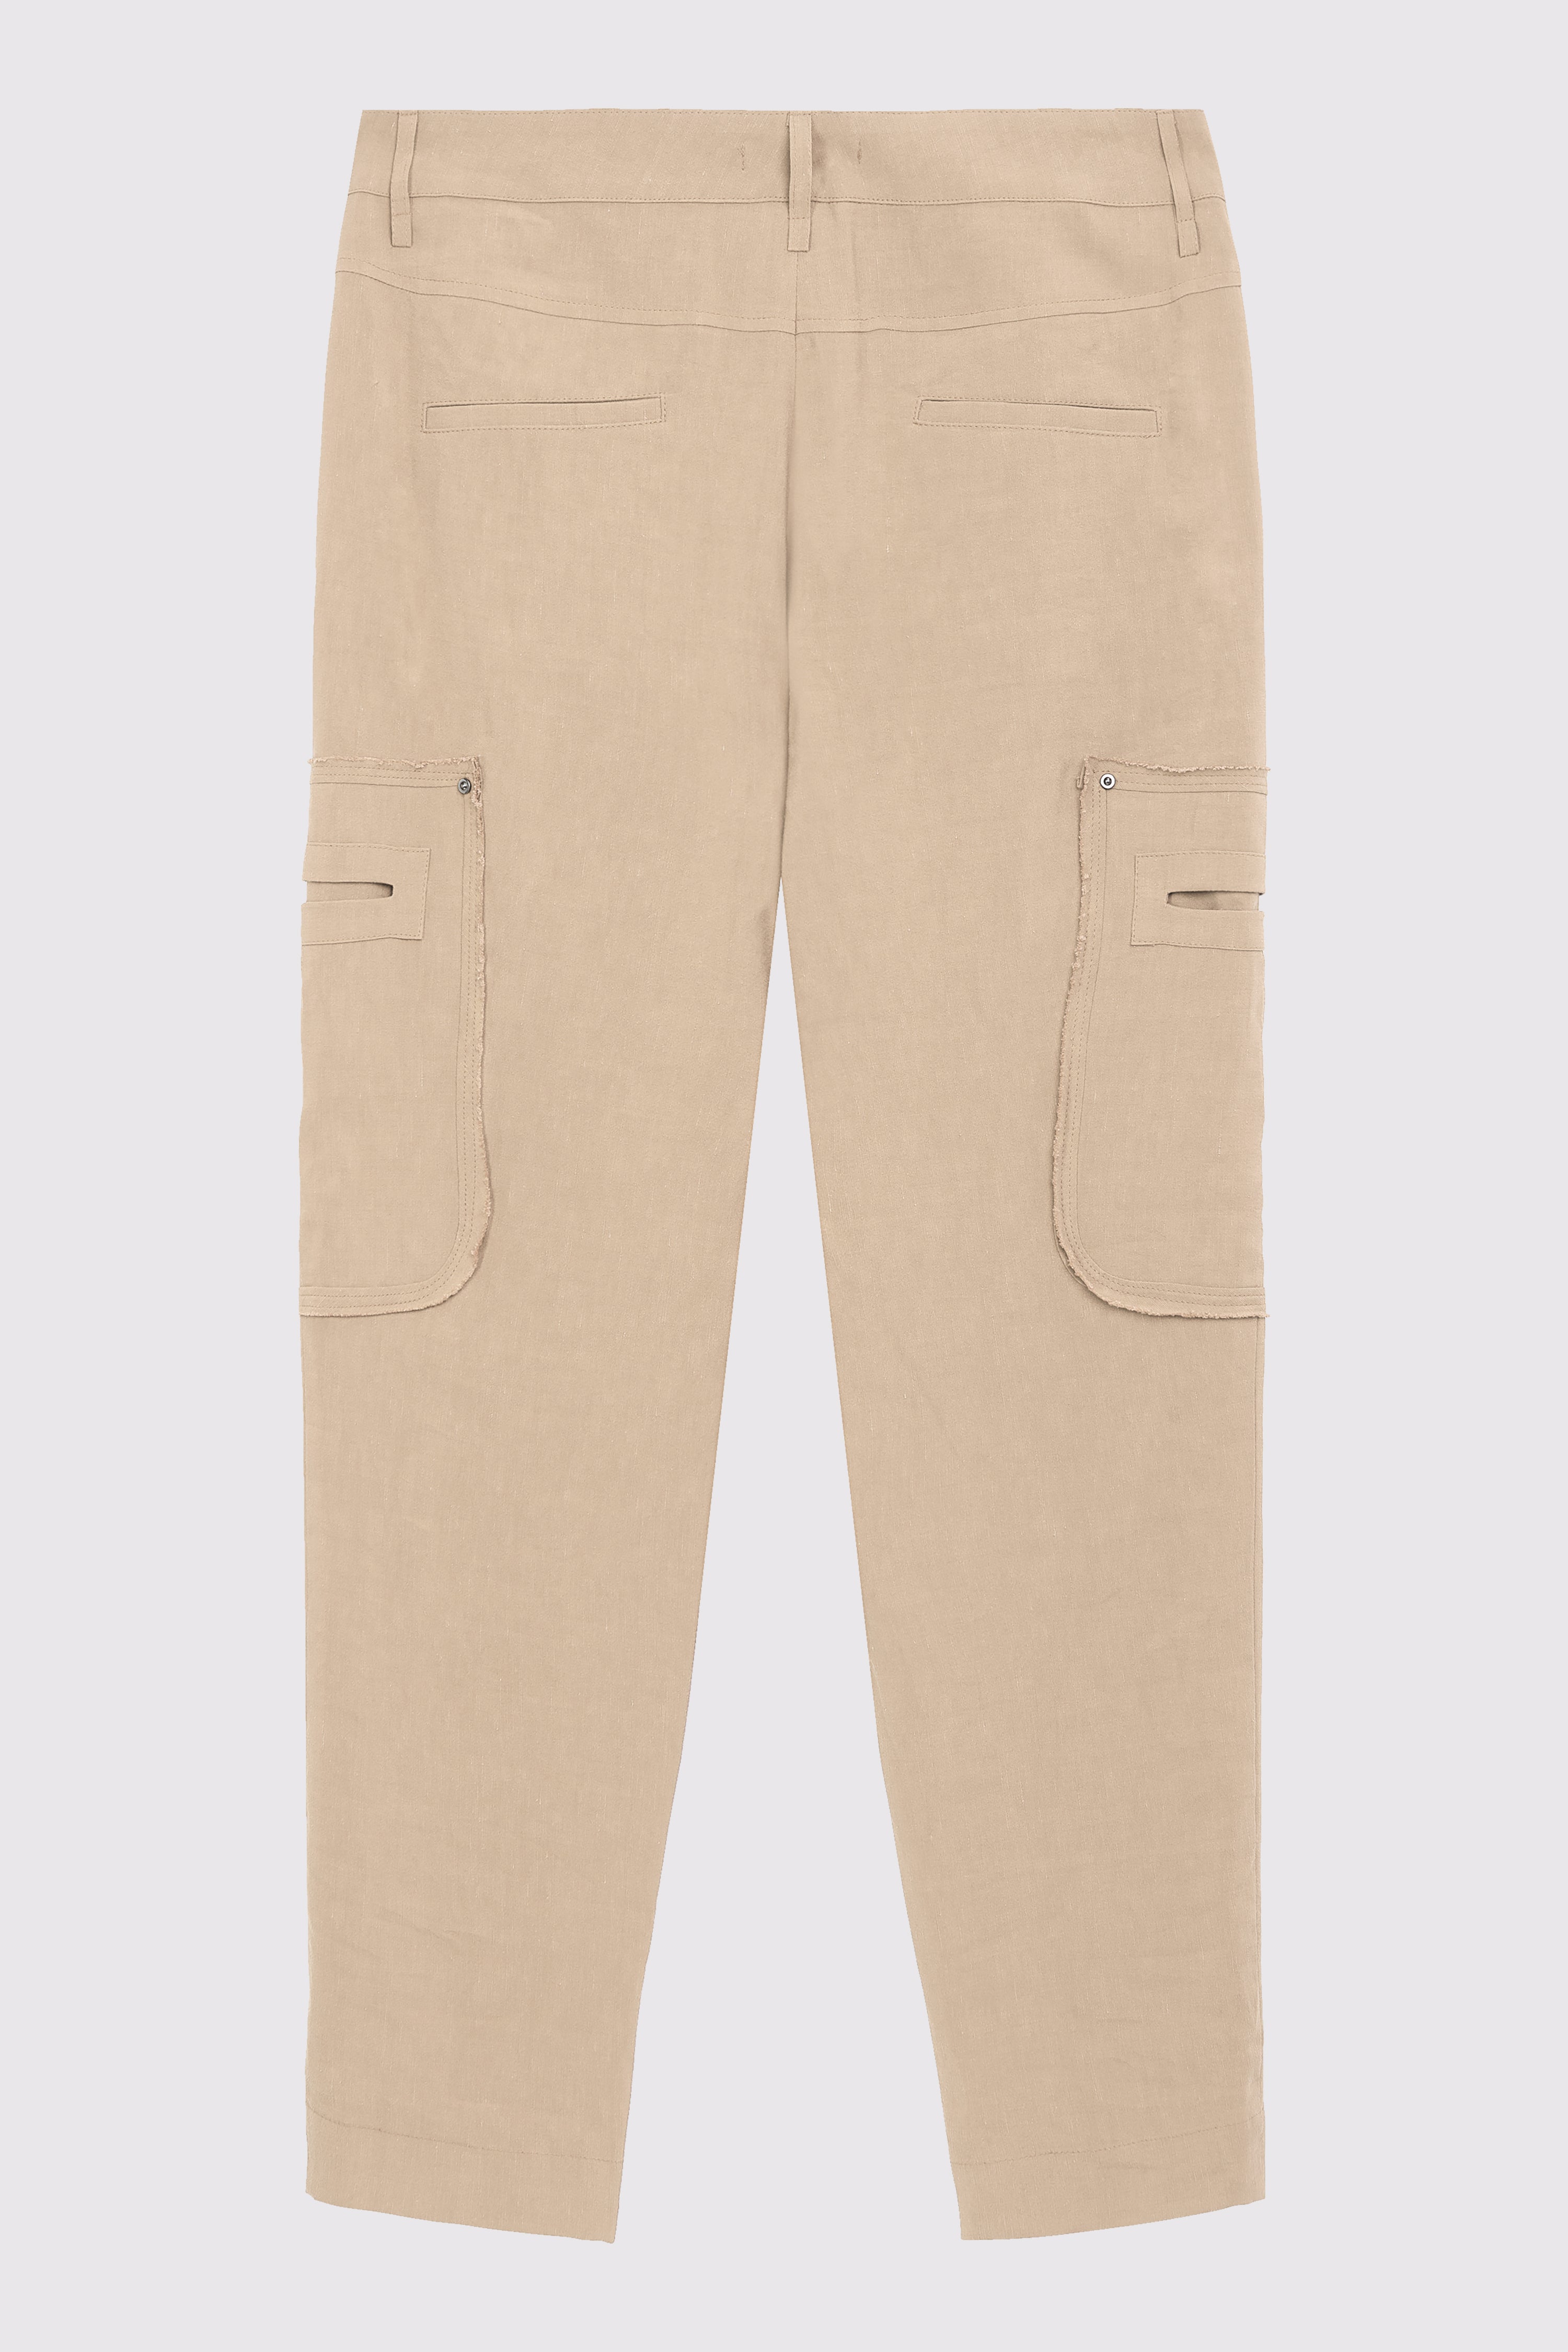 worker pant